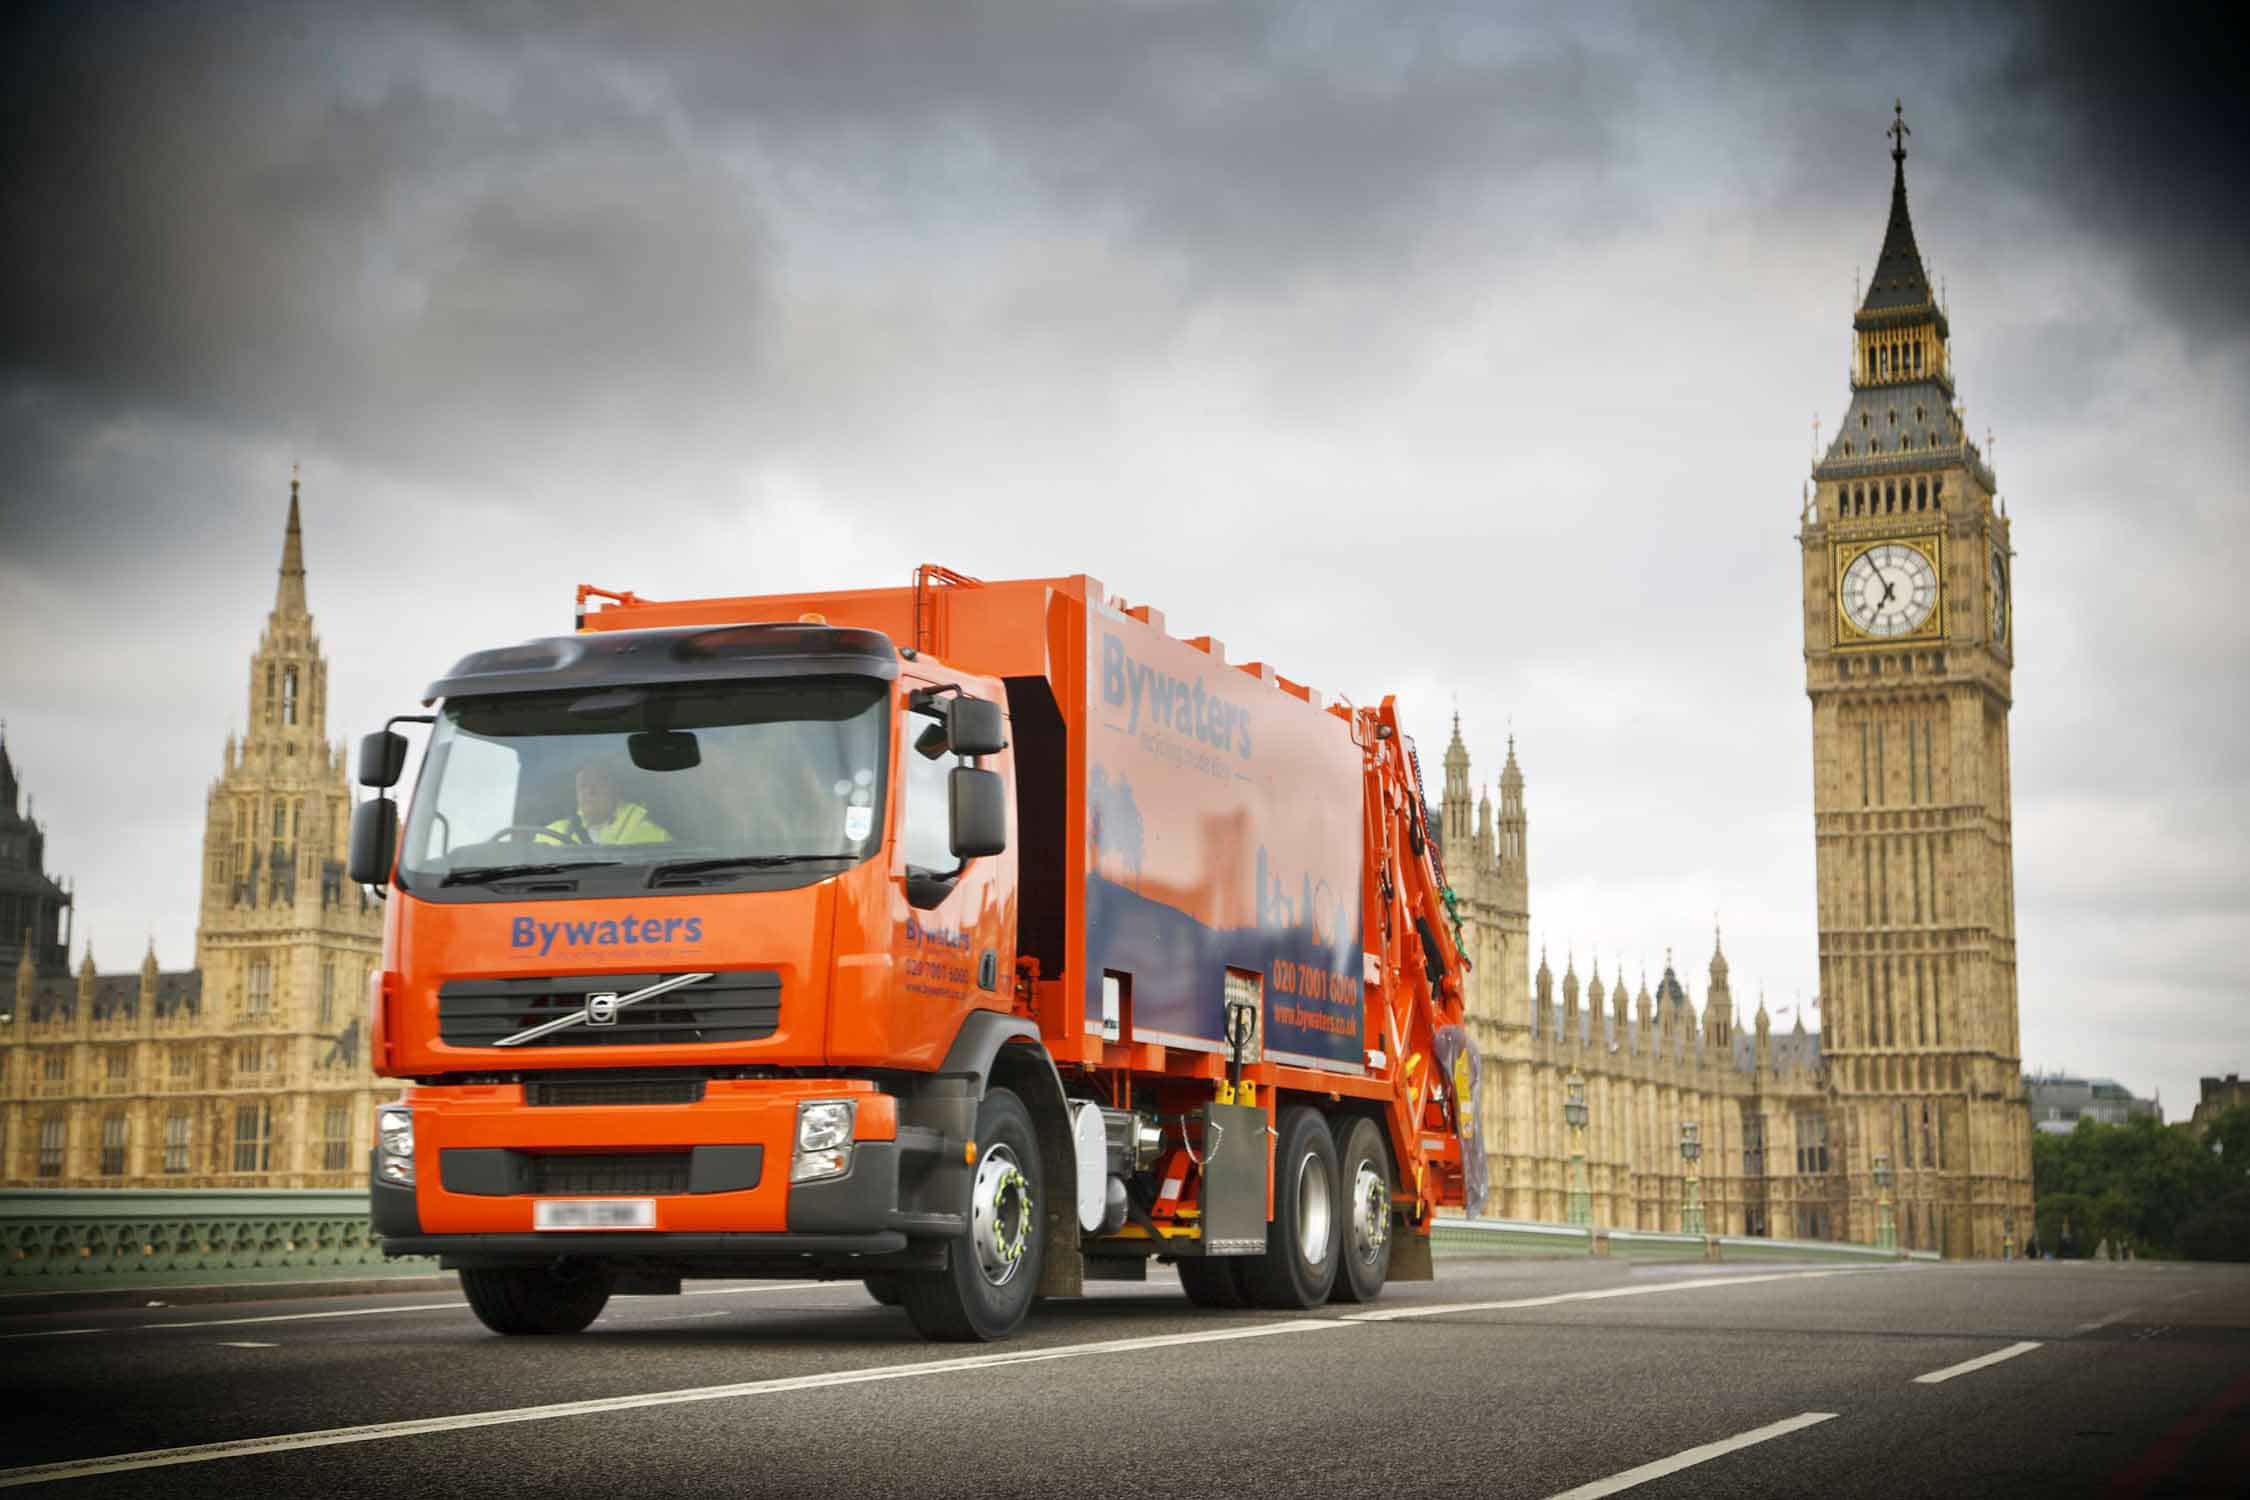 Bywaters has invested in safety systems across half of its vehicle fleet